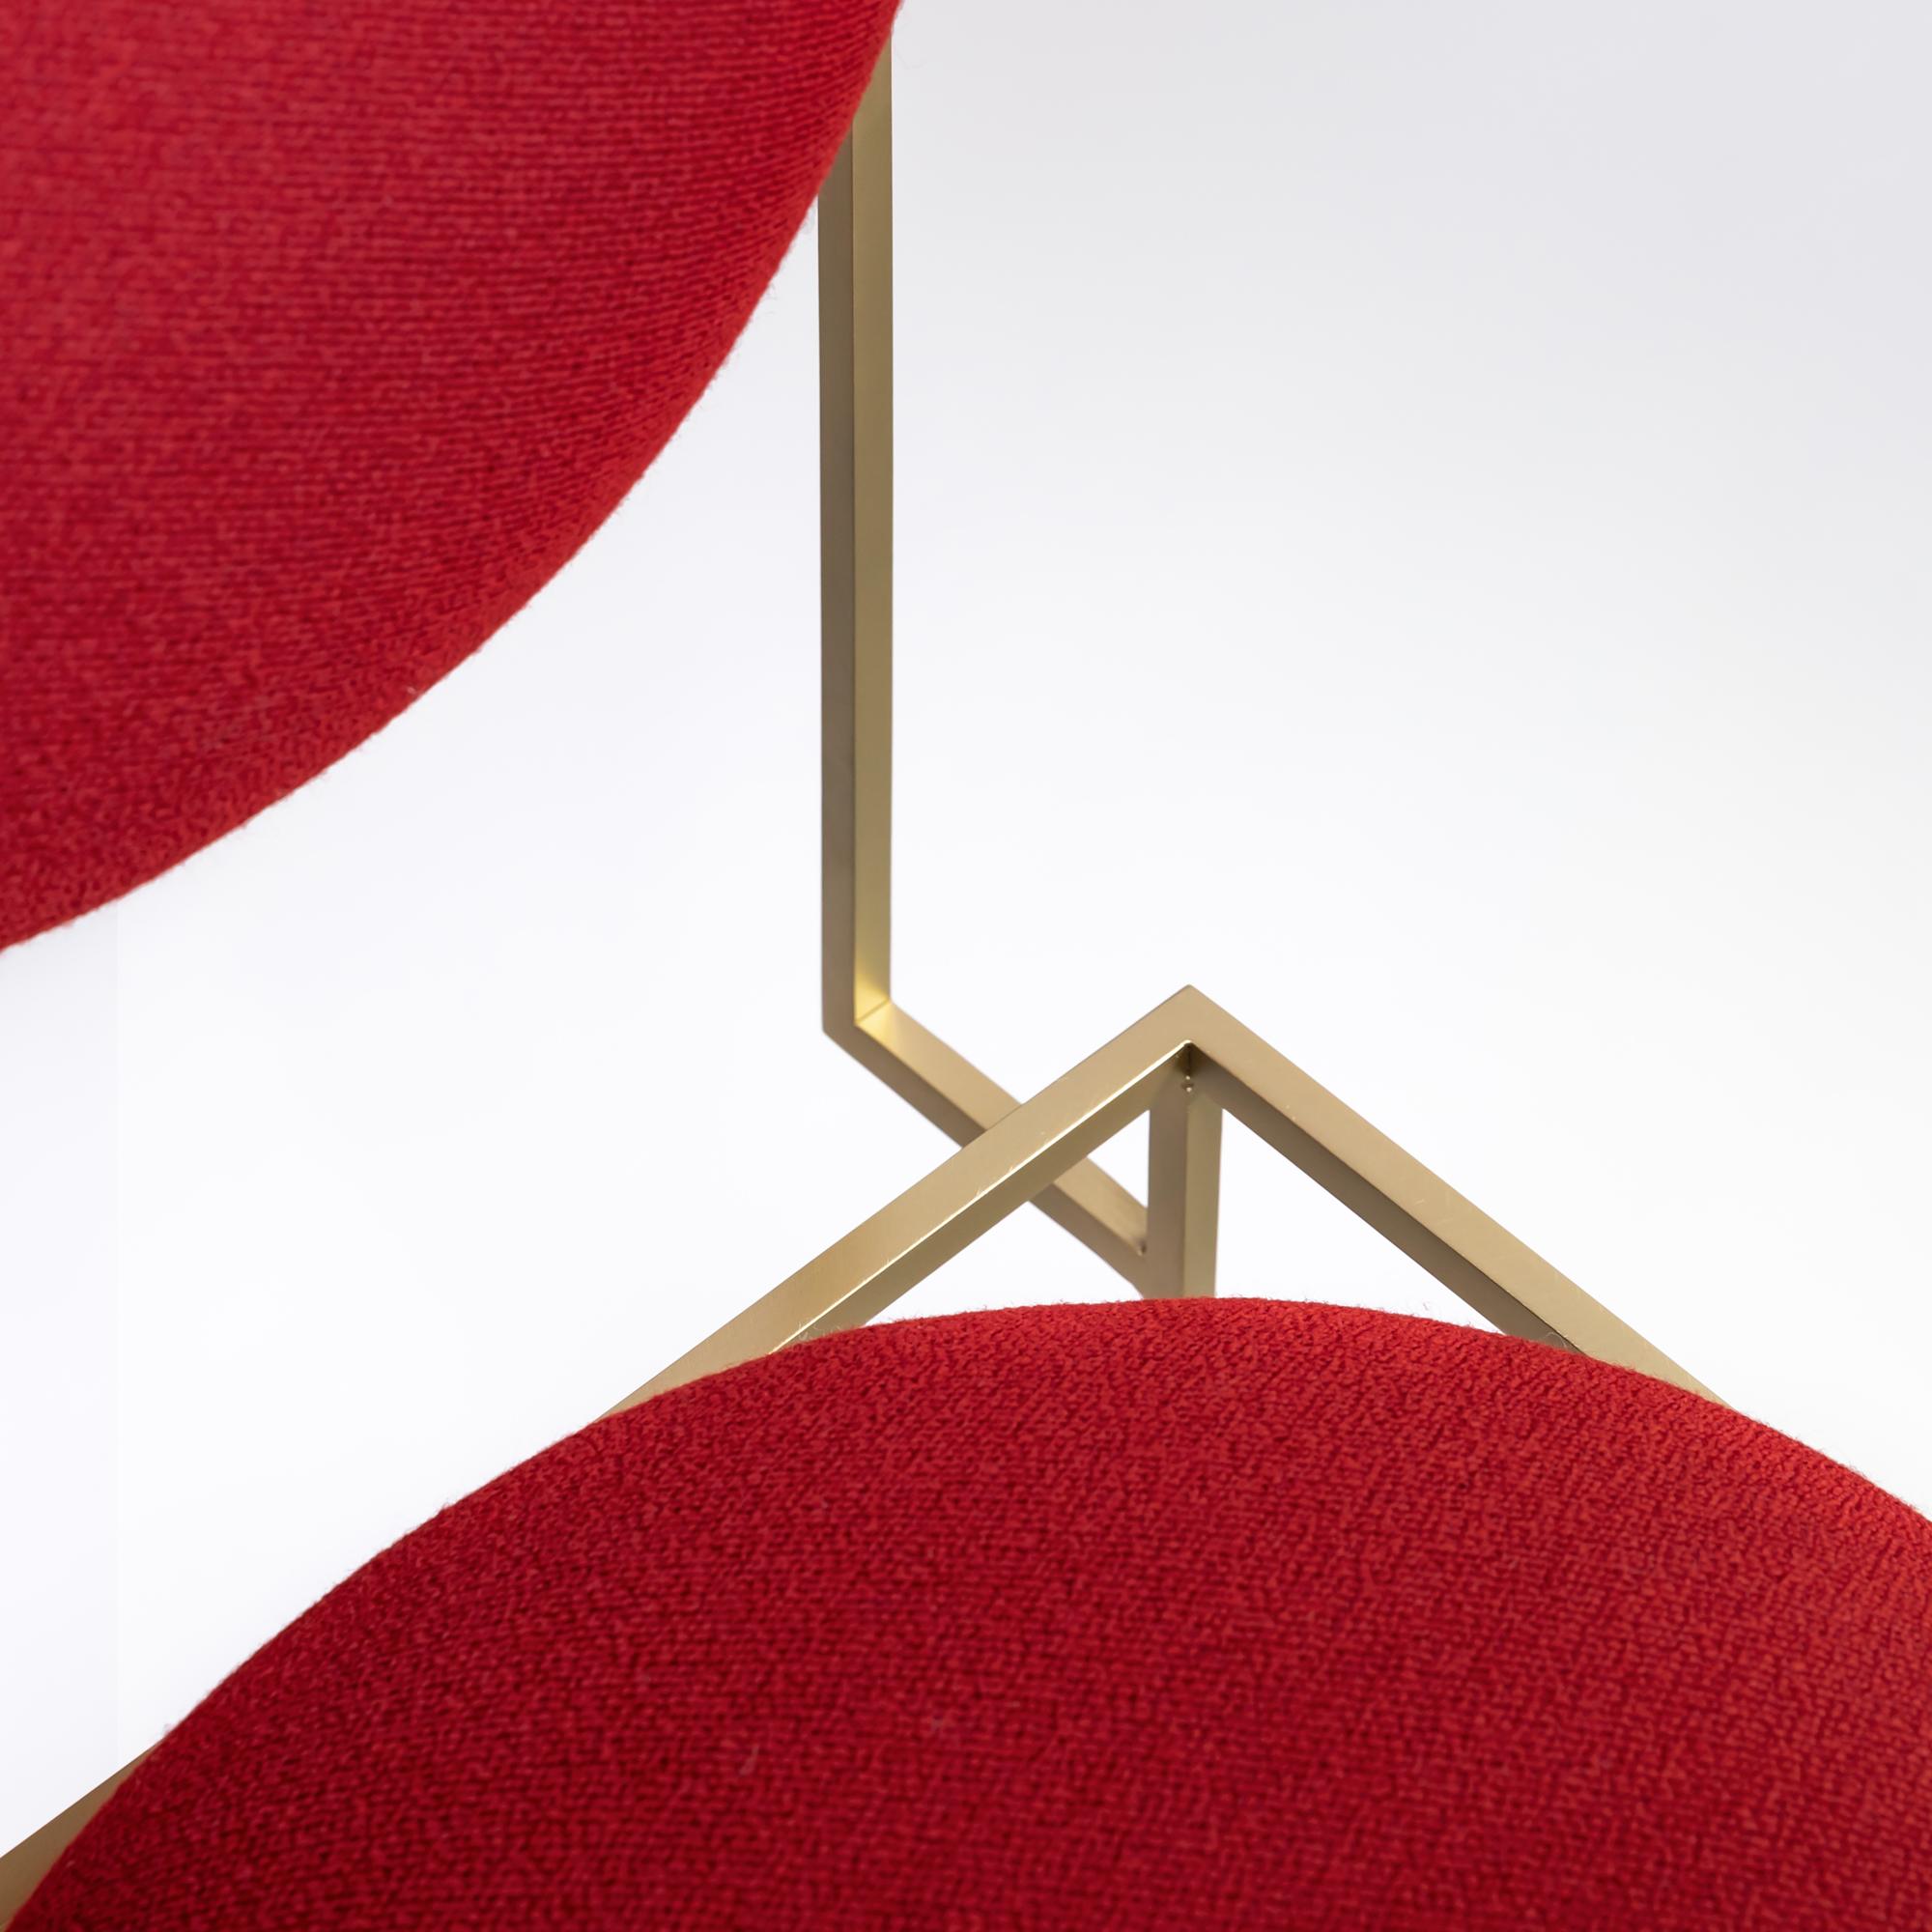 Modern Solar Chair in Red Wool Fabric and Brushed Brass Frame by Lara Bohinc